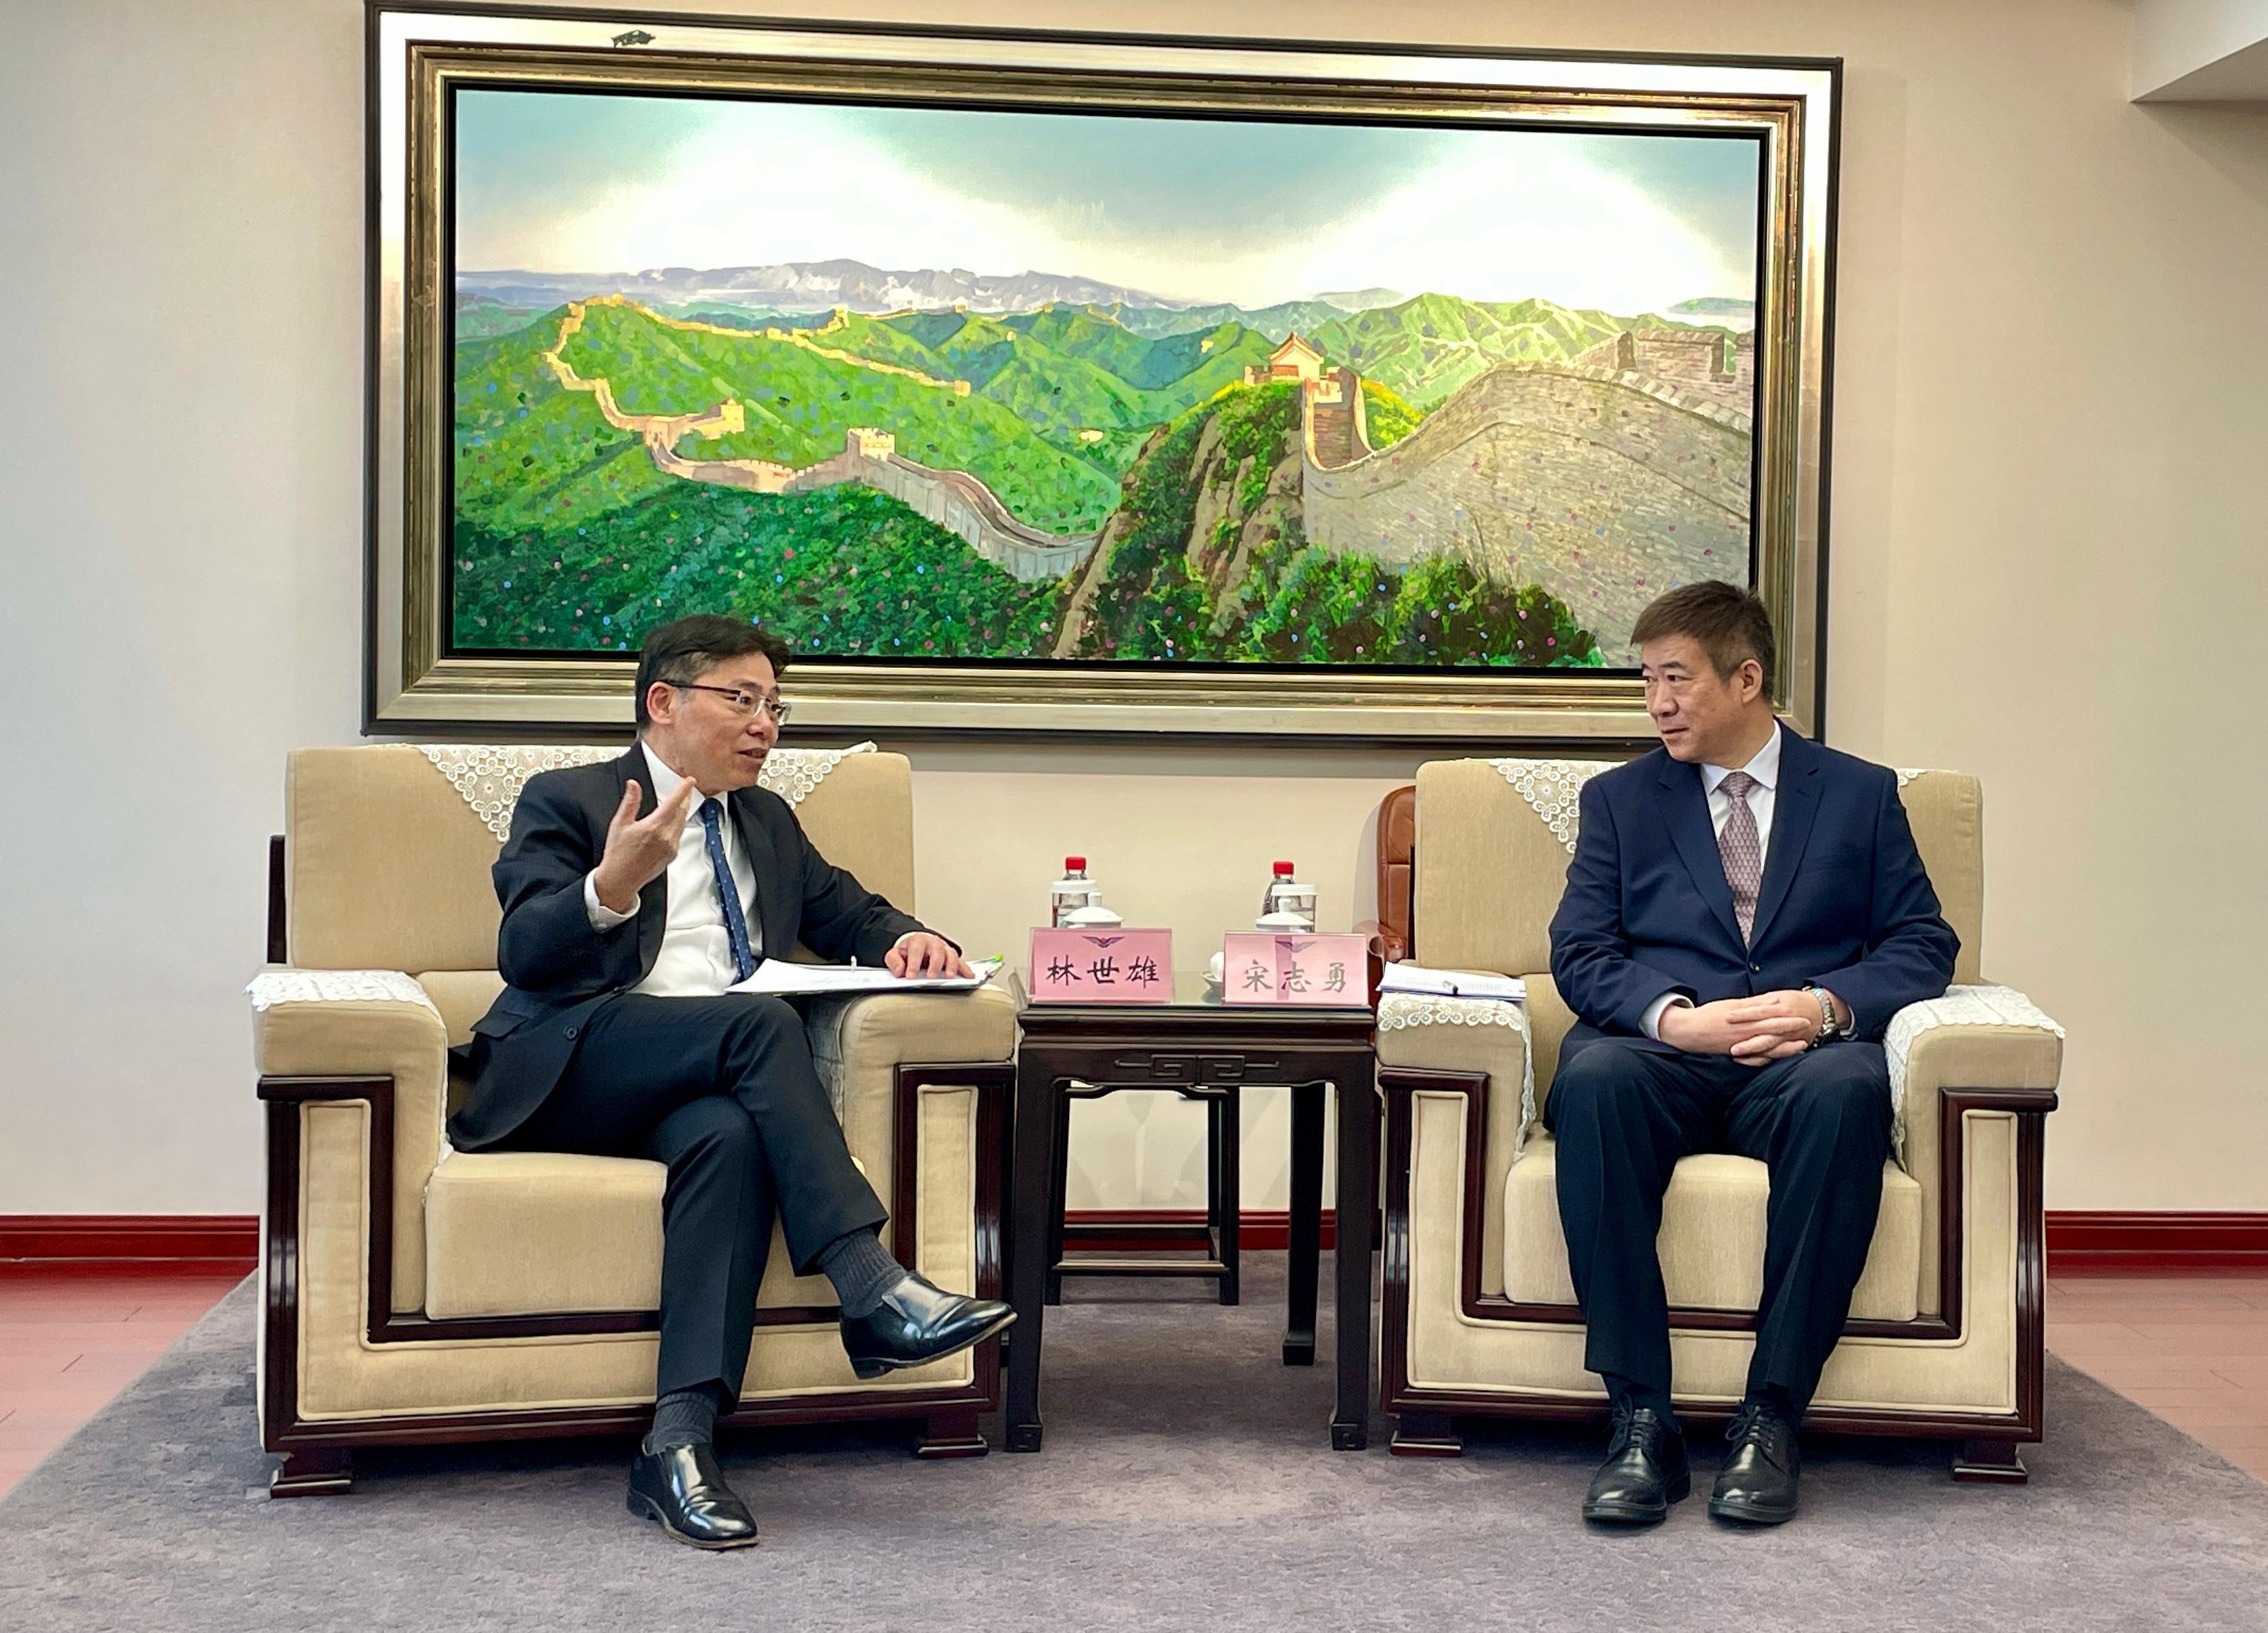 The Secretary for Transport and Logistics, Mr Lam Sai-hung (left), meets with the Administrator of the Civil Aviation Administration of China, Mr Song Zhiyong (right), in Beijing today (April 10) to discuss arrangements to further enhance the aviation connectivity between Hong Kong and the Mainland. 